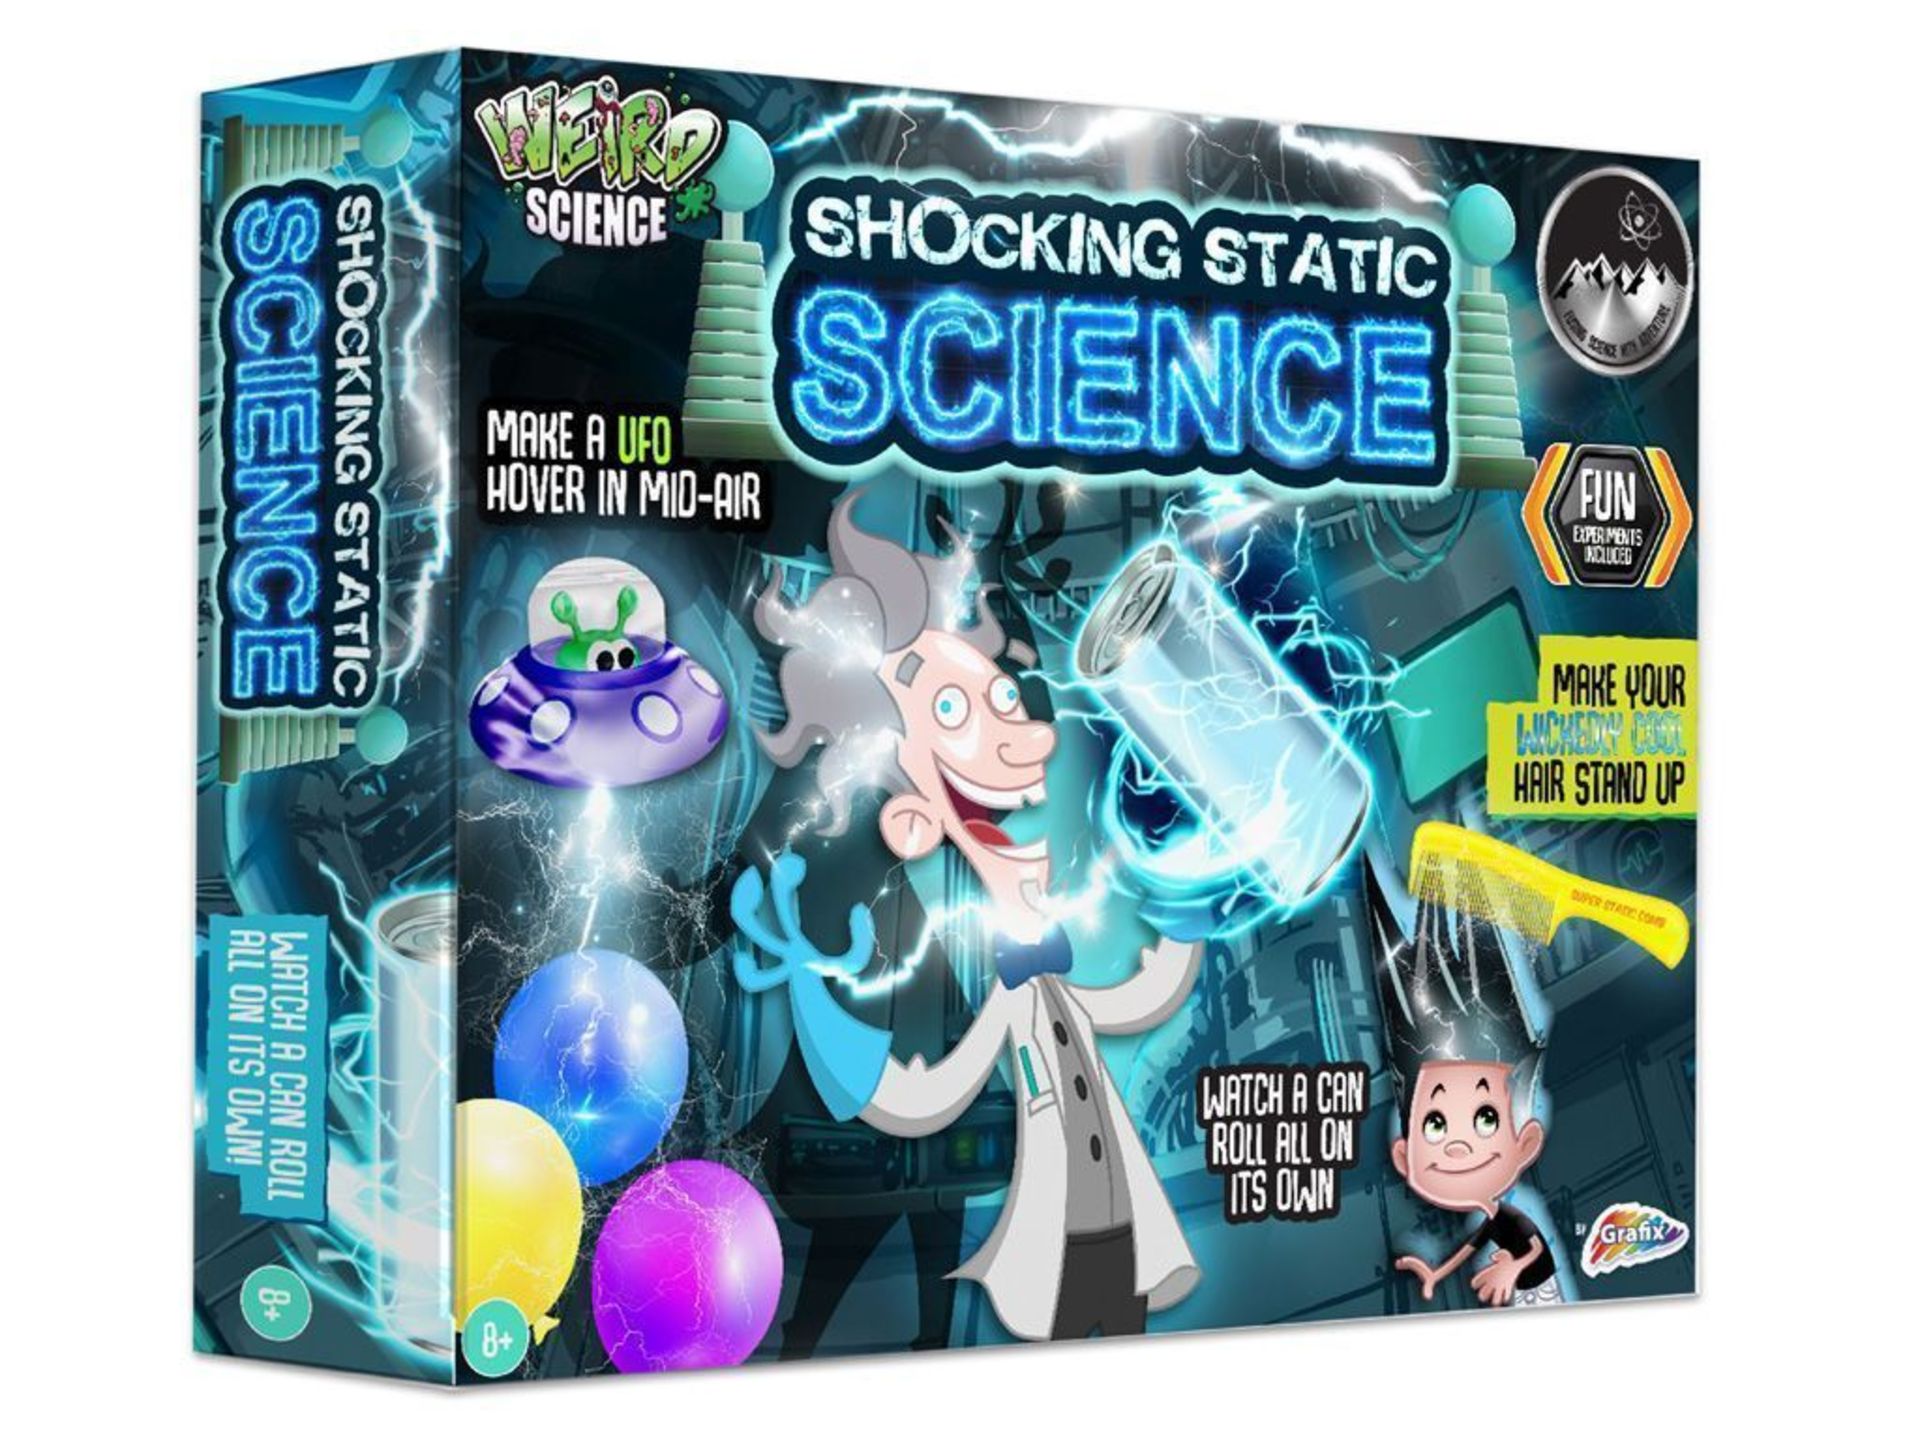 WEIRD SCIENCE SHOCKING STATIC SCIENCE